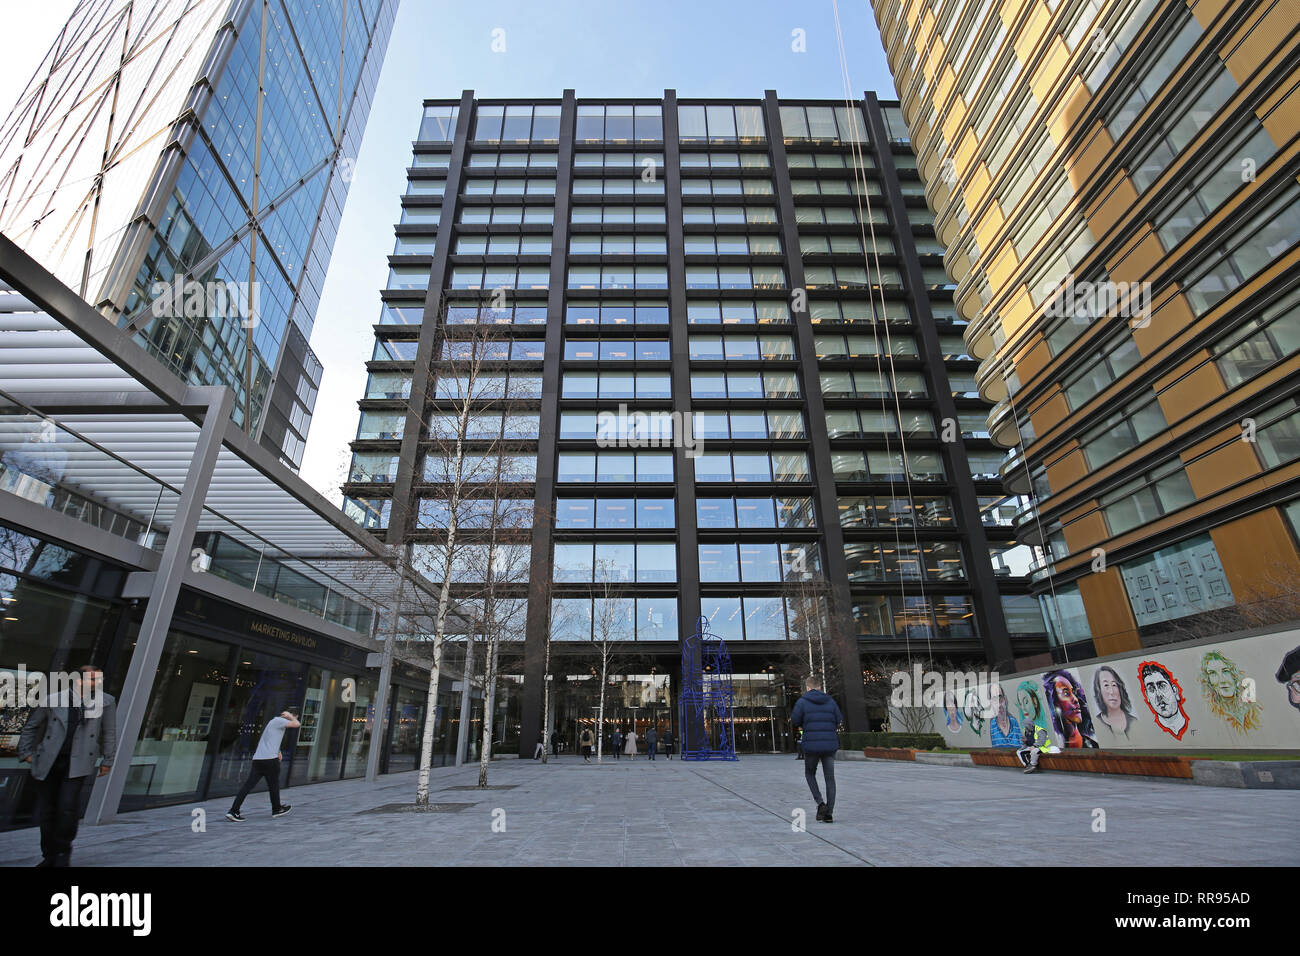 Amazon's anonymous new UK headquarters building in London at Principal Place, near Liverpool Street. Shows adjoining residential tower to right. Stock Photo